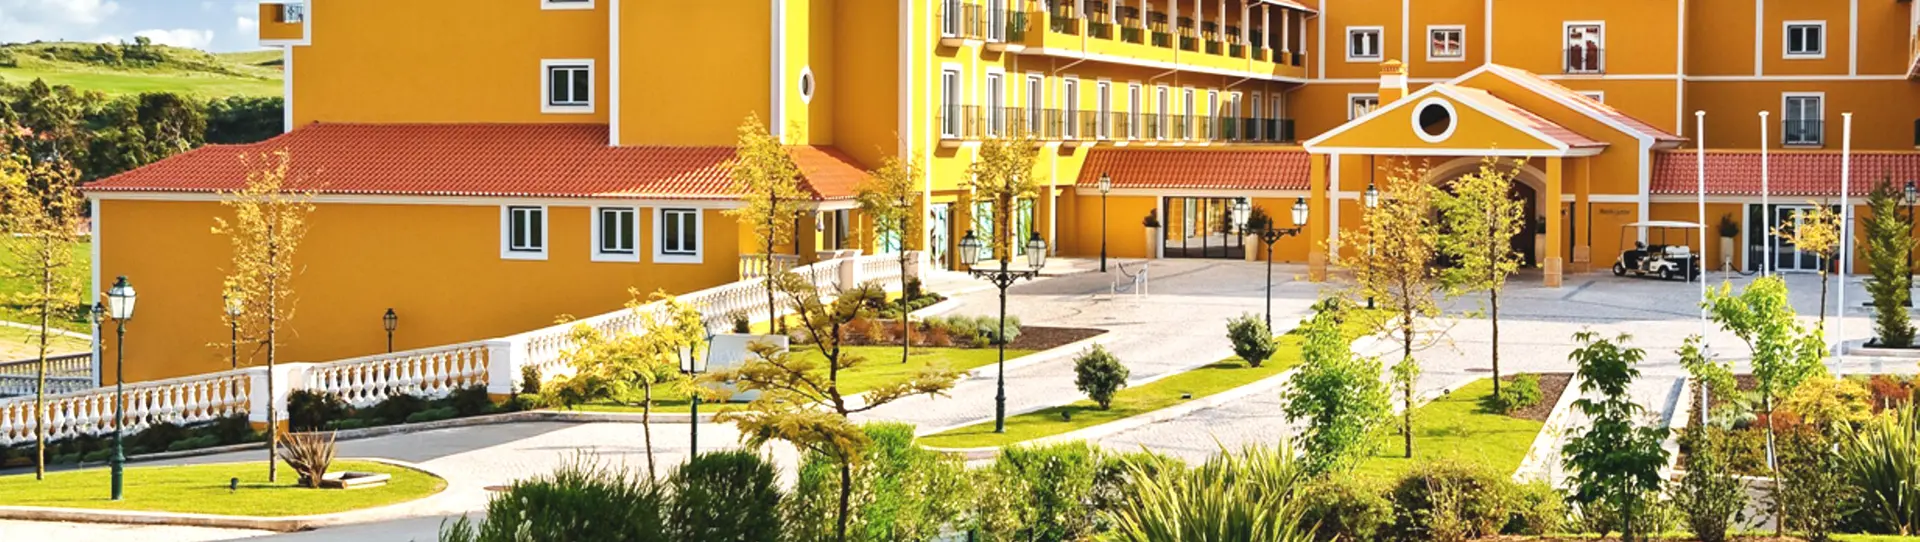 Portugal golf holidays - 7 Nights BB & 5 Days Unlimited Golf <br>PRO Package - Photo 1